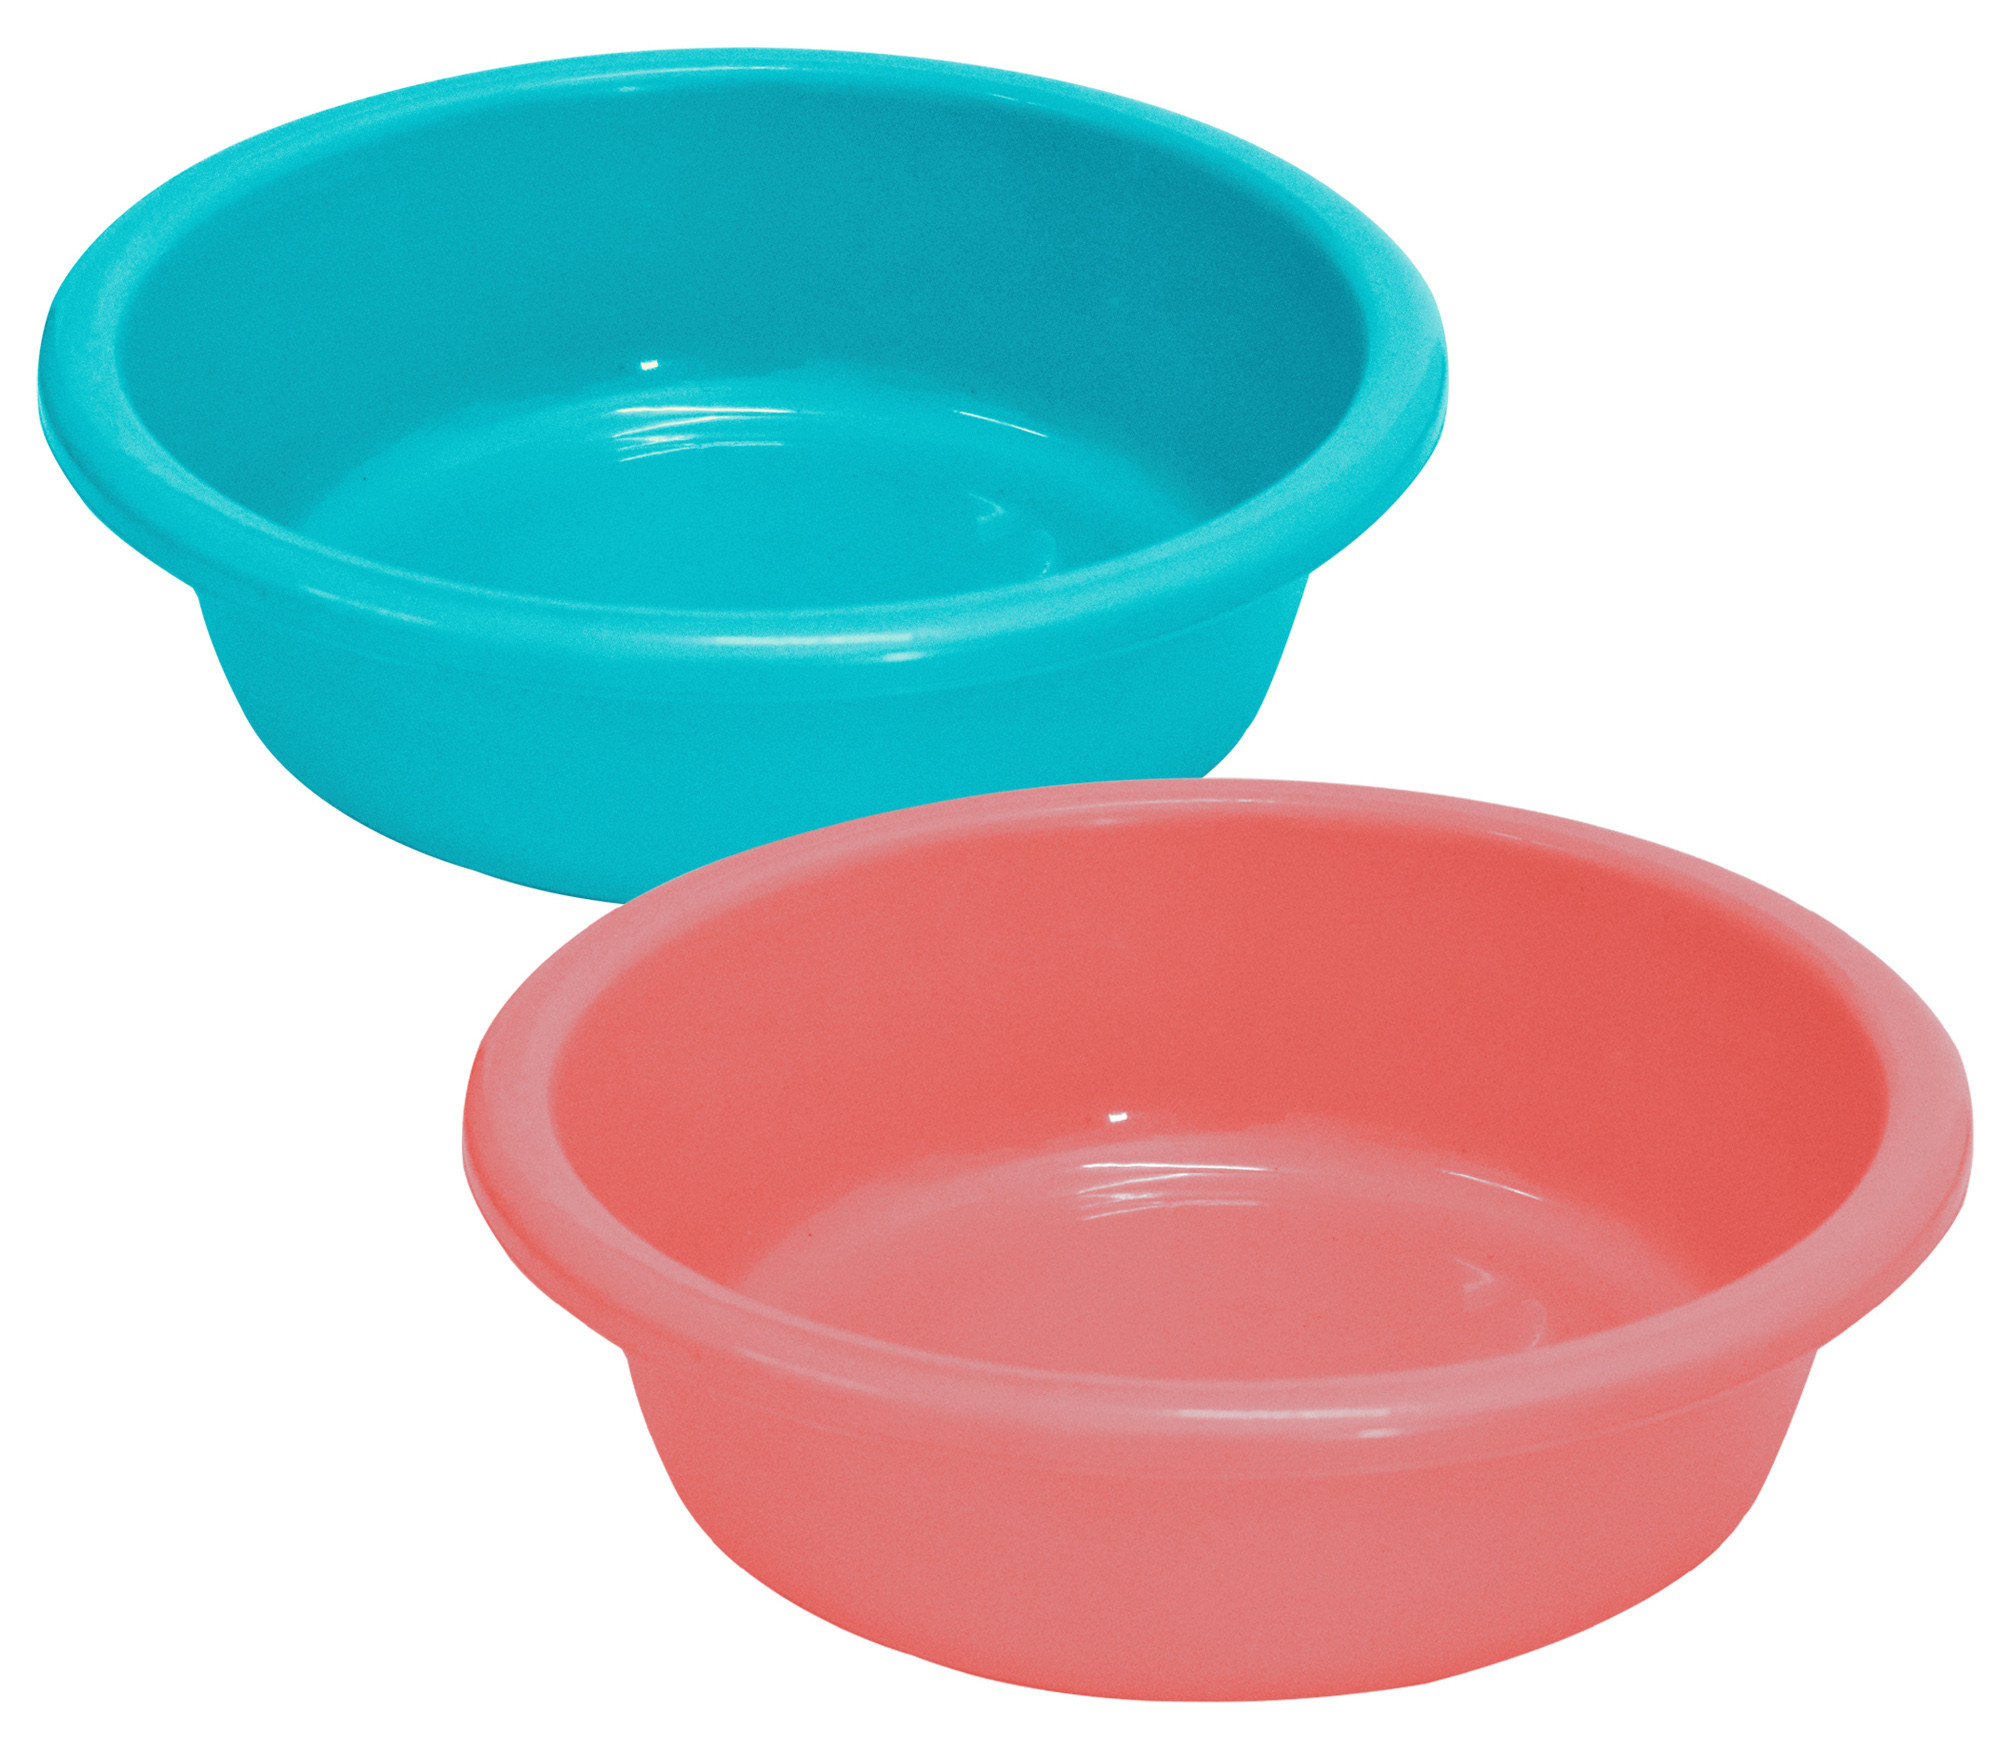 Kuber Industries Multiuses Unbreakable Plastic Knead Dough Basket/Basin Bowl For Home & Kitchen 6 Ltr- Pack of 2 (Sky Blue & Light Pink)